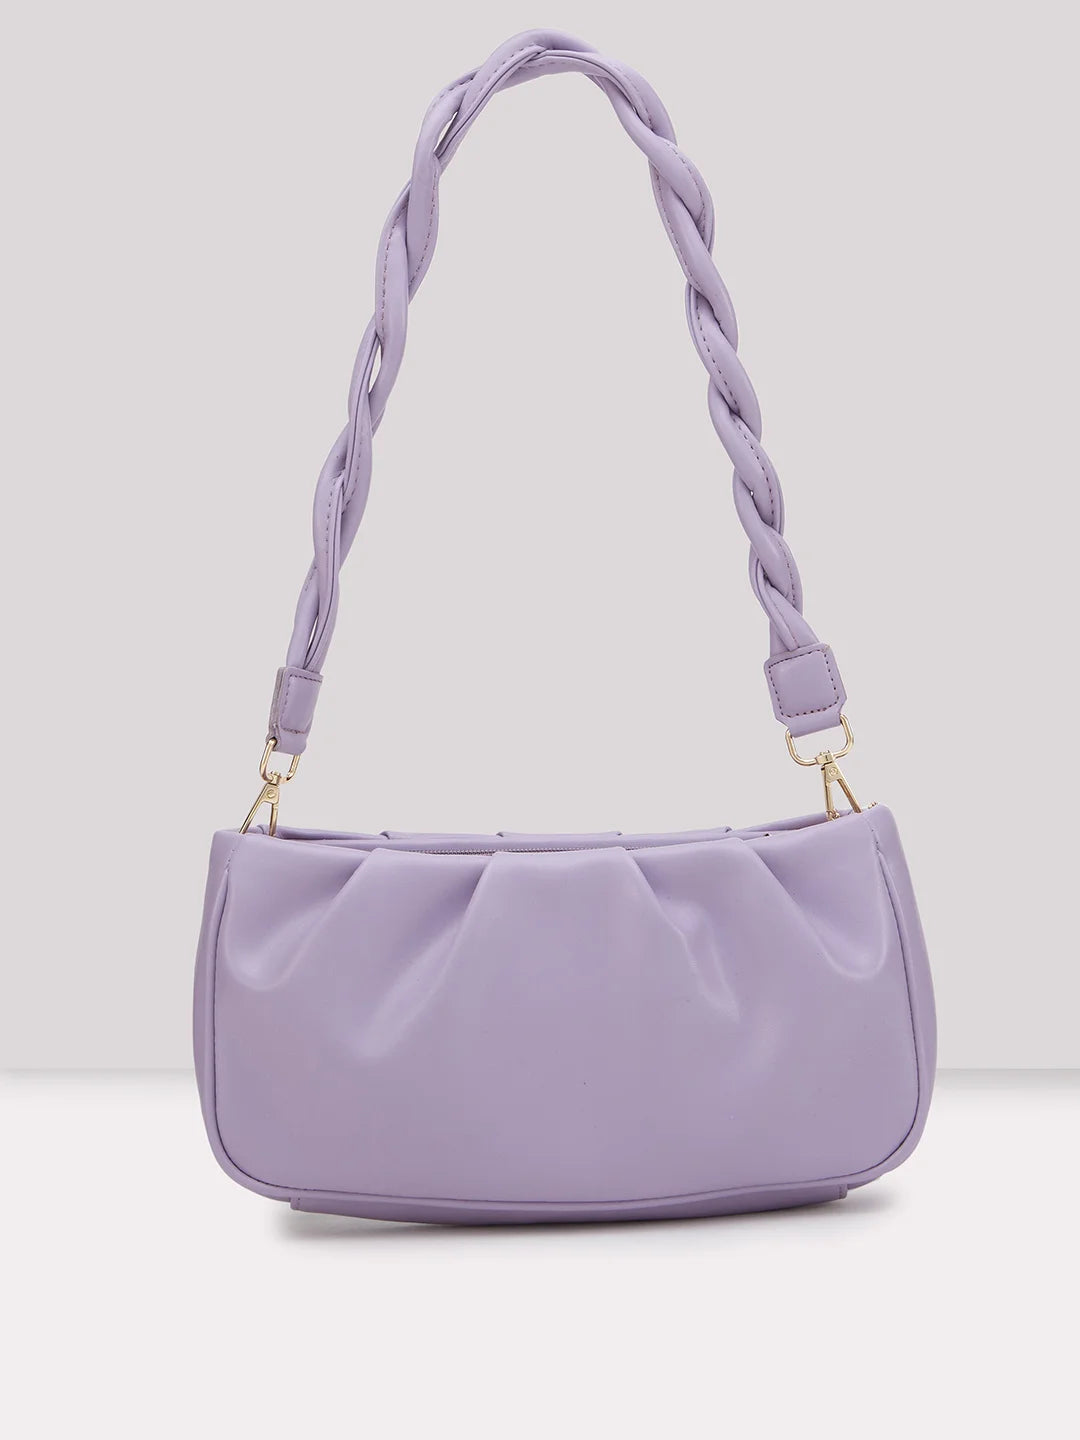 Marc Jacobs The Teddy St. Marc Mini Top Handle in Lilac | REVOLVE